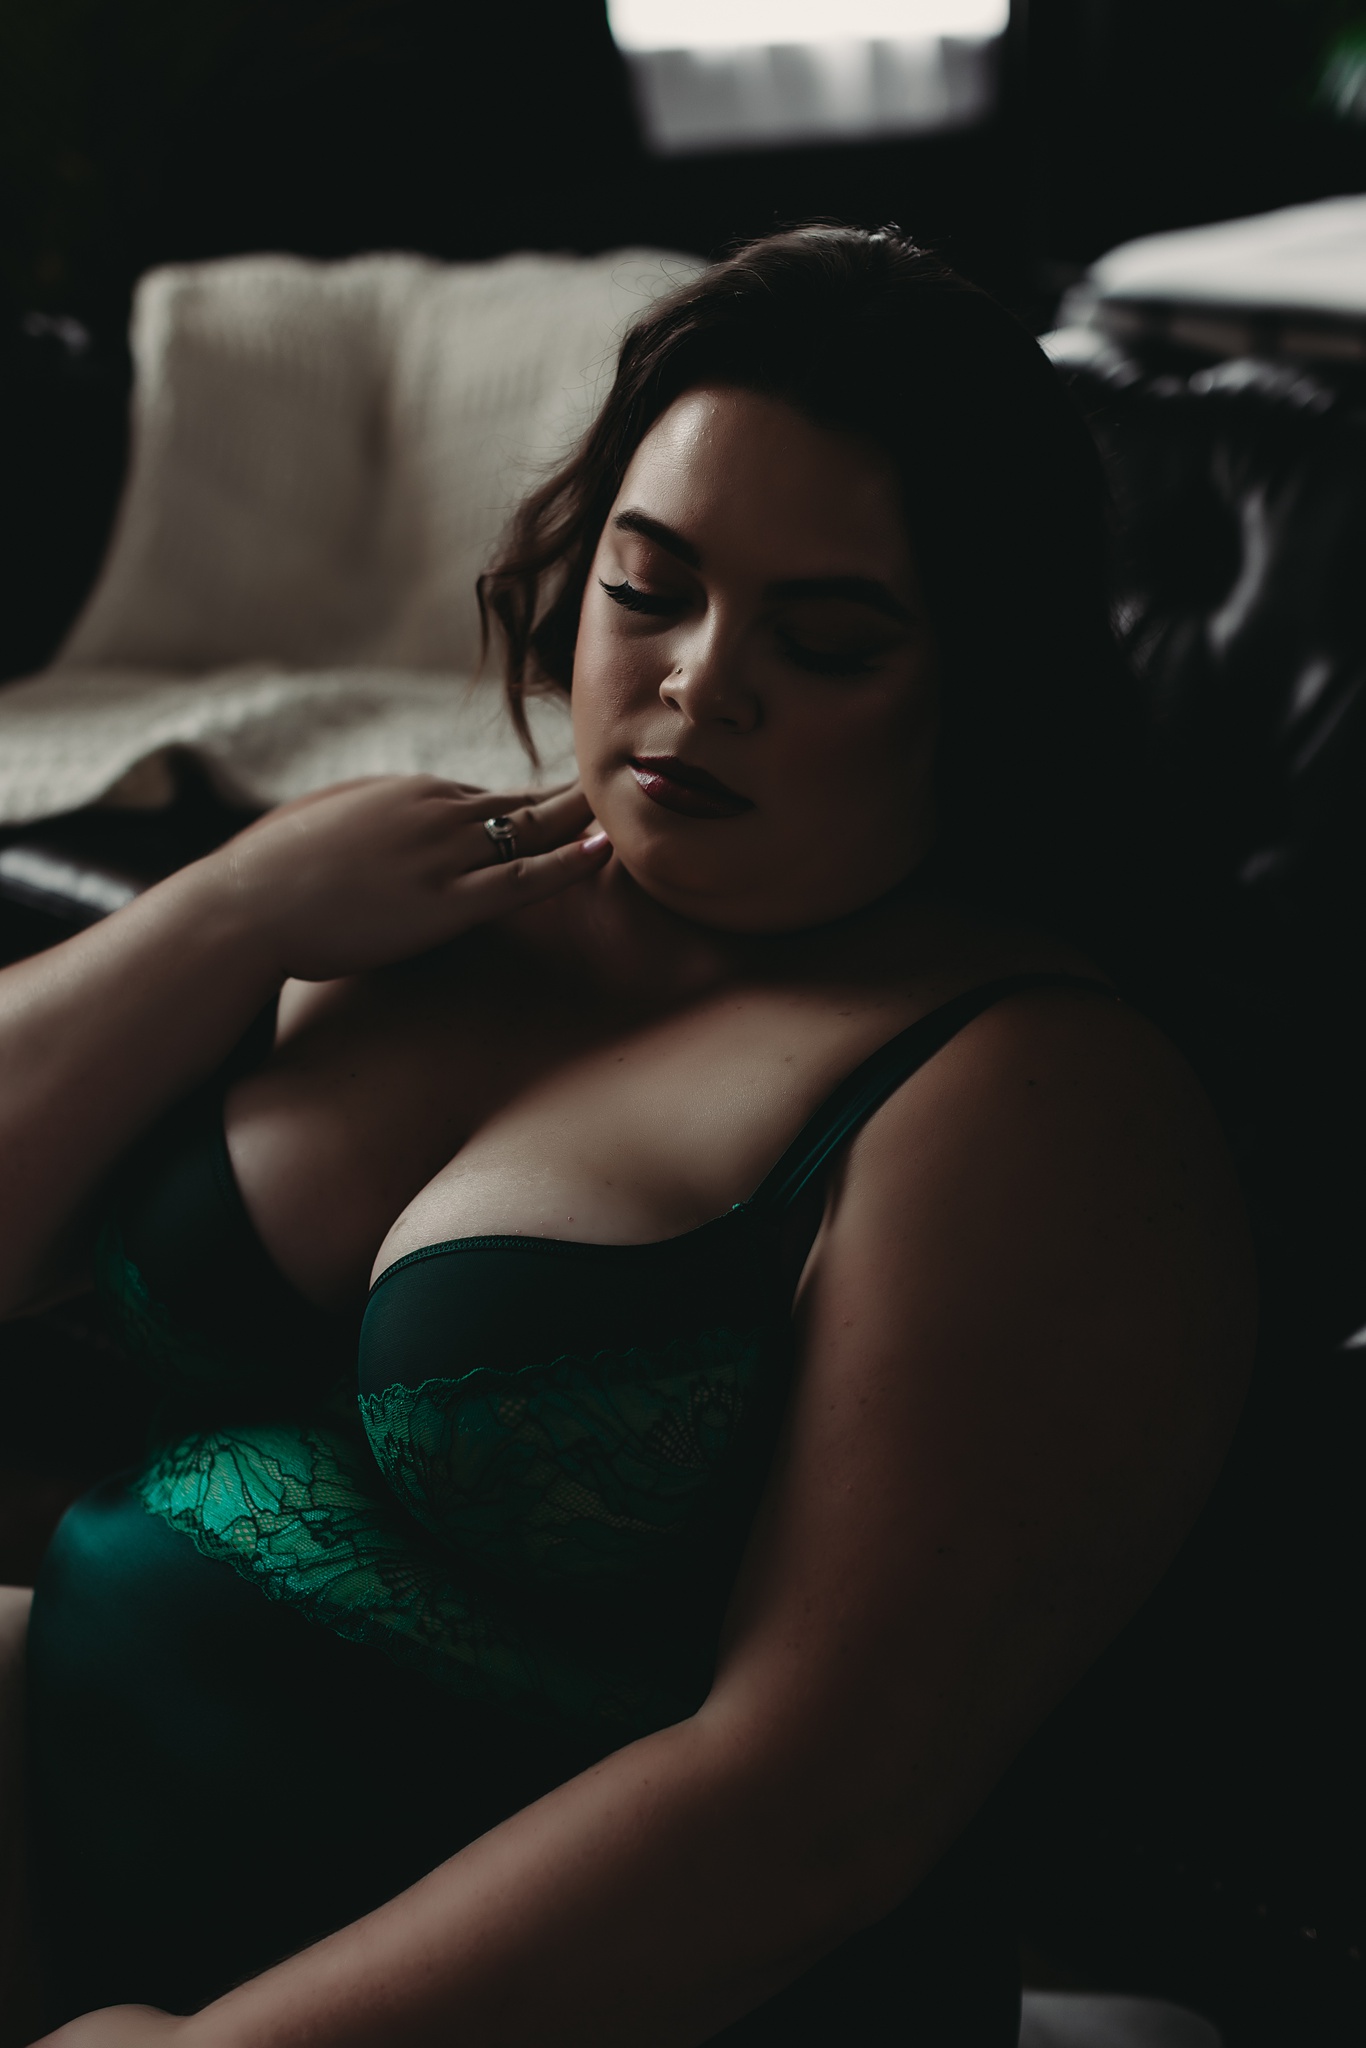 woman sitting on the floor wearing green lingerie